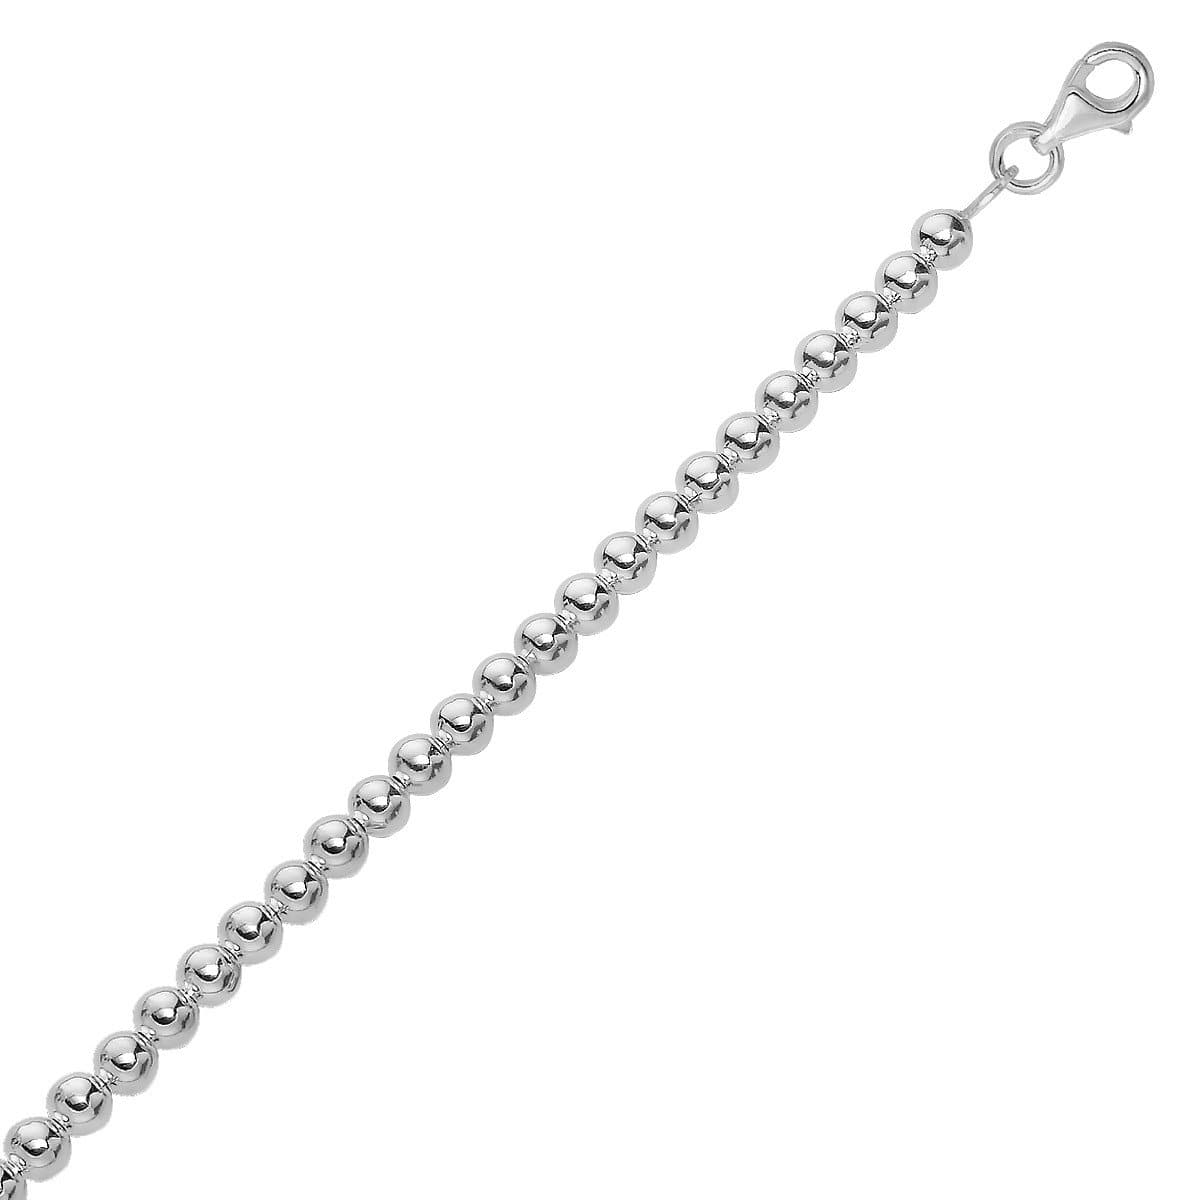 Sterling Silver Rhodium Plated Bracelet with a Polished Bead Motif